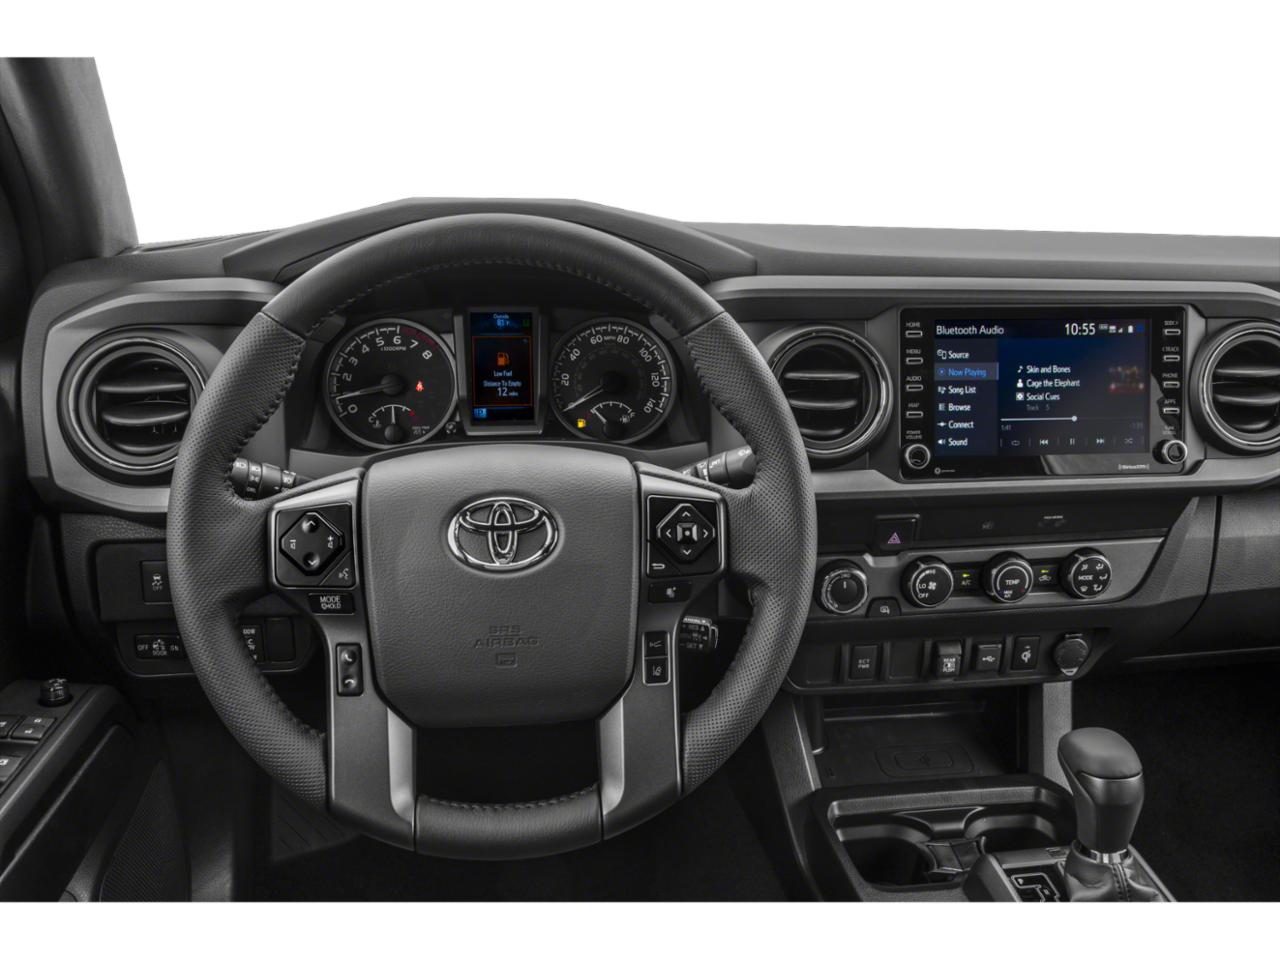 2020 Toyota Tacoma 4WD Vehicle Photo in Pinellas Park , FL 33781